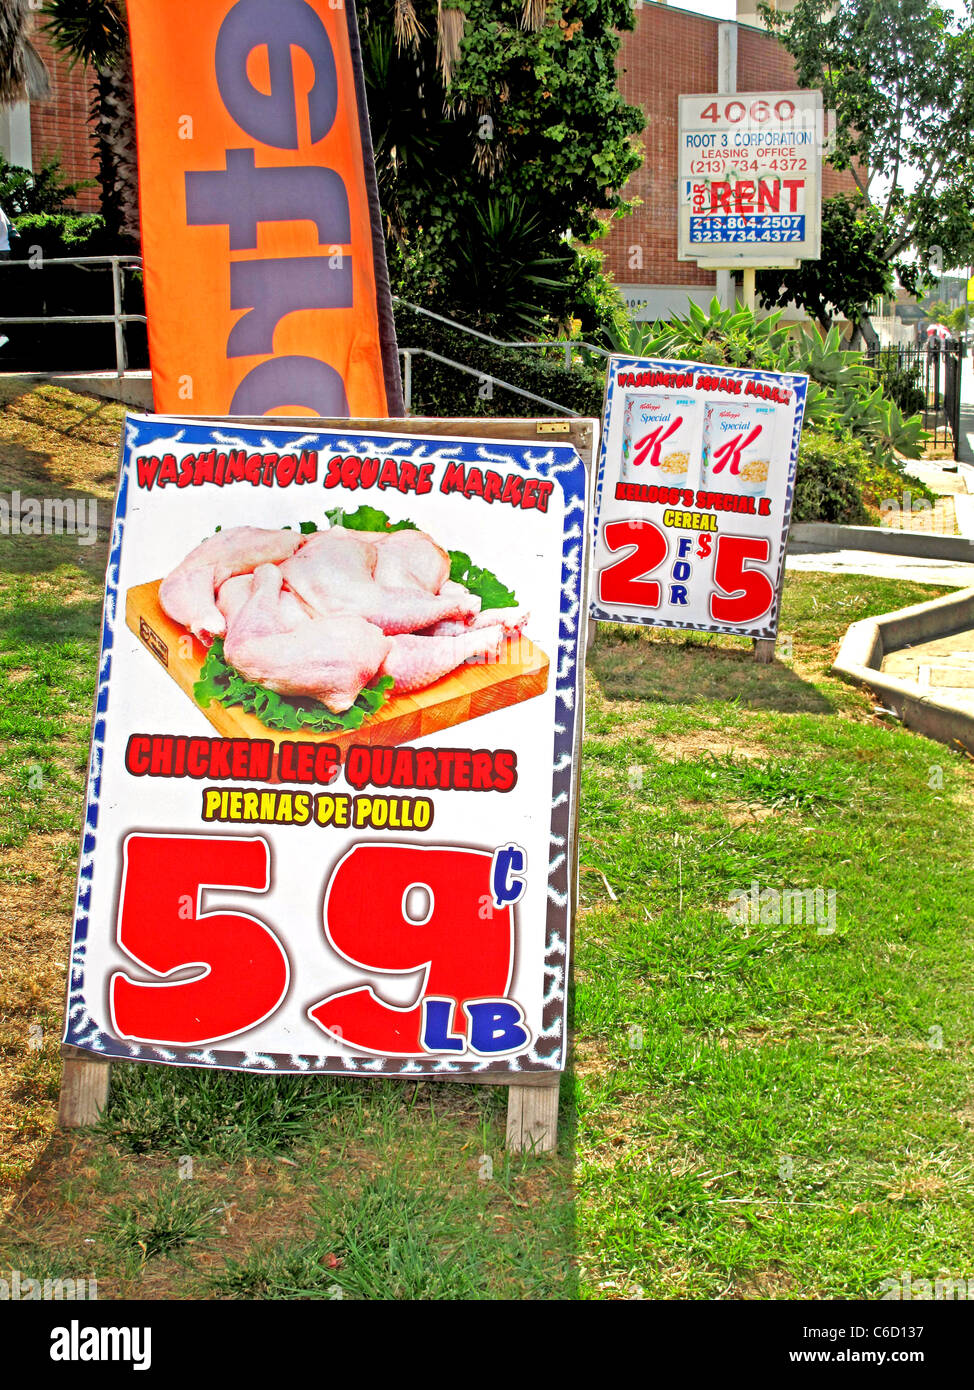 Spanish/English bilingual grocery signs advertise bargains in the ethnically mixed West Adams district of Los Angeles. Stock Photo